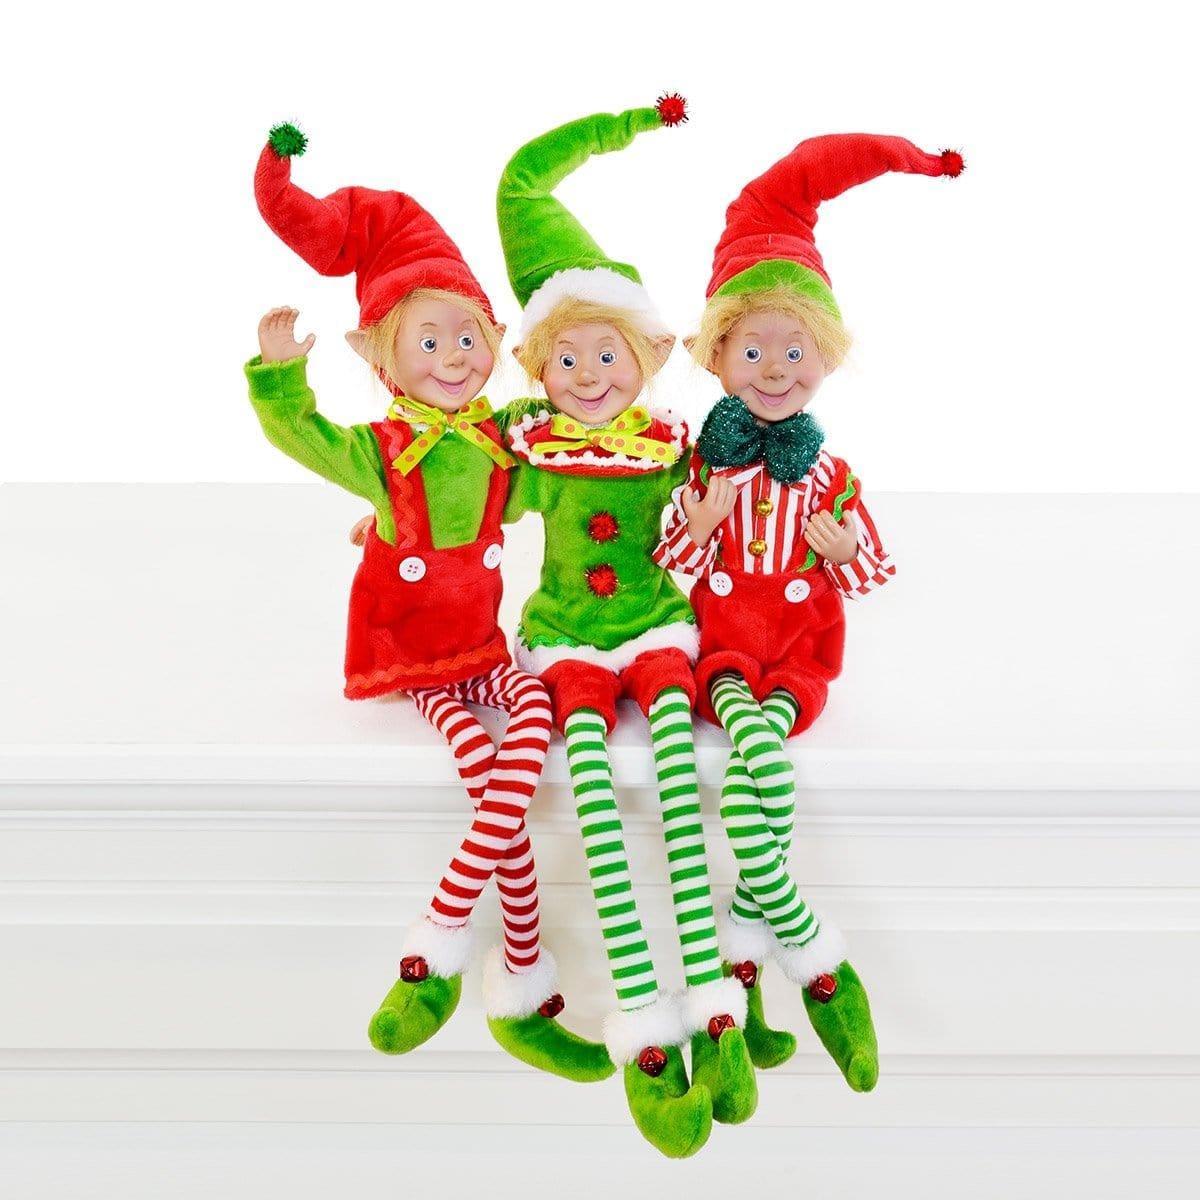 Buy Christmas Flexible Elf 18 in. Asst. sold at Party Expert